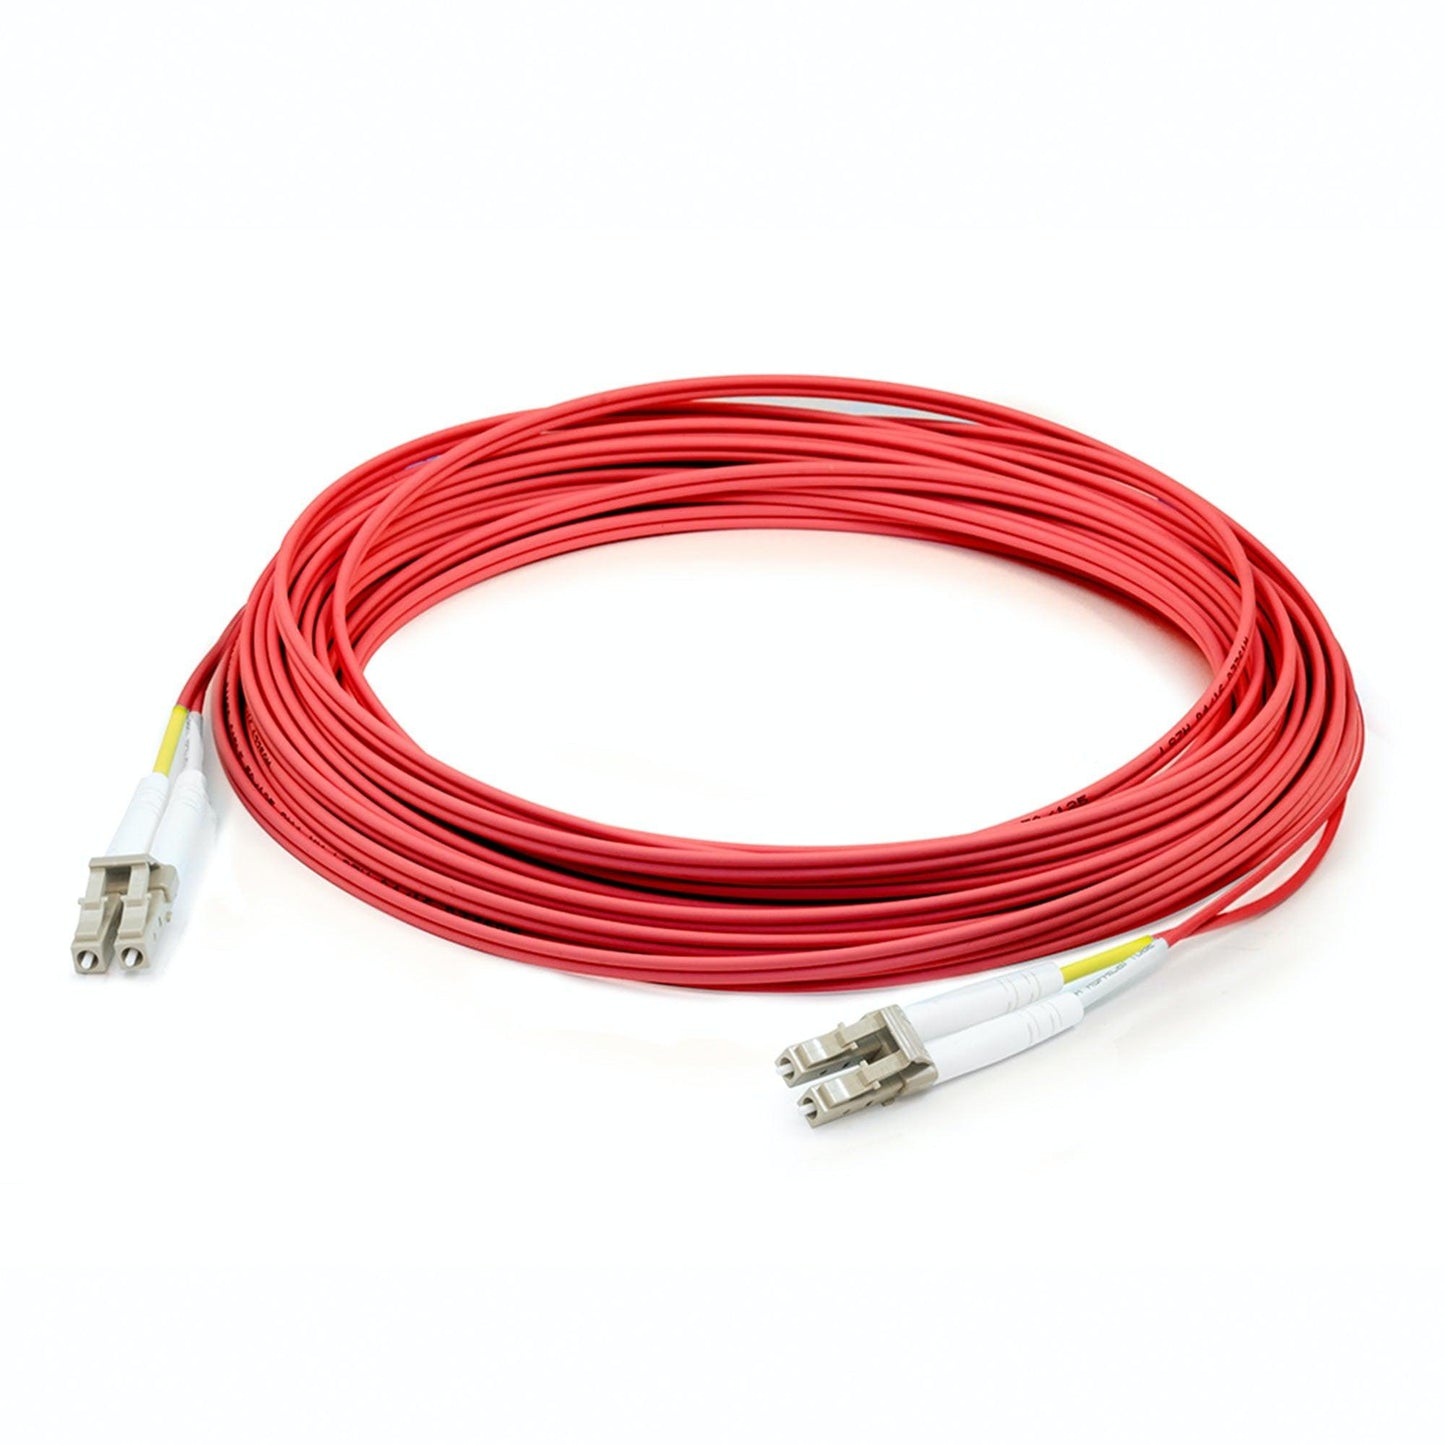 Addon Networks Add-Lc-Lc-15M5Om2-Rd-Taa Fibre Optic Cable 15 M 2X Lc Ofnr Os2 Red